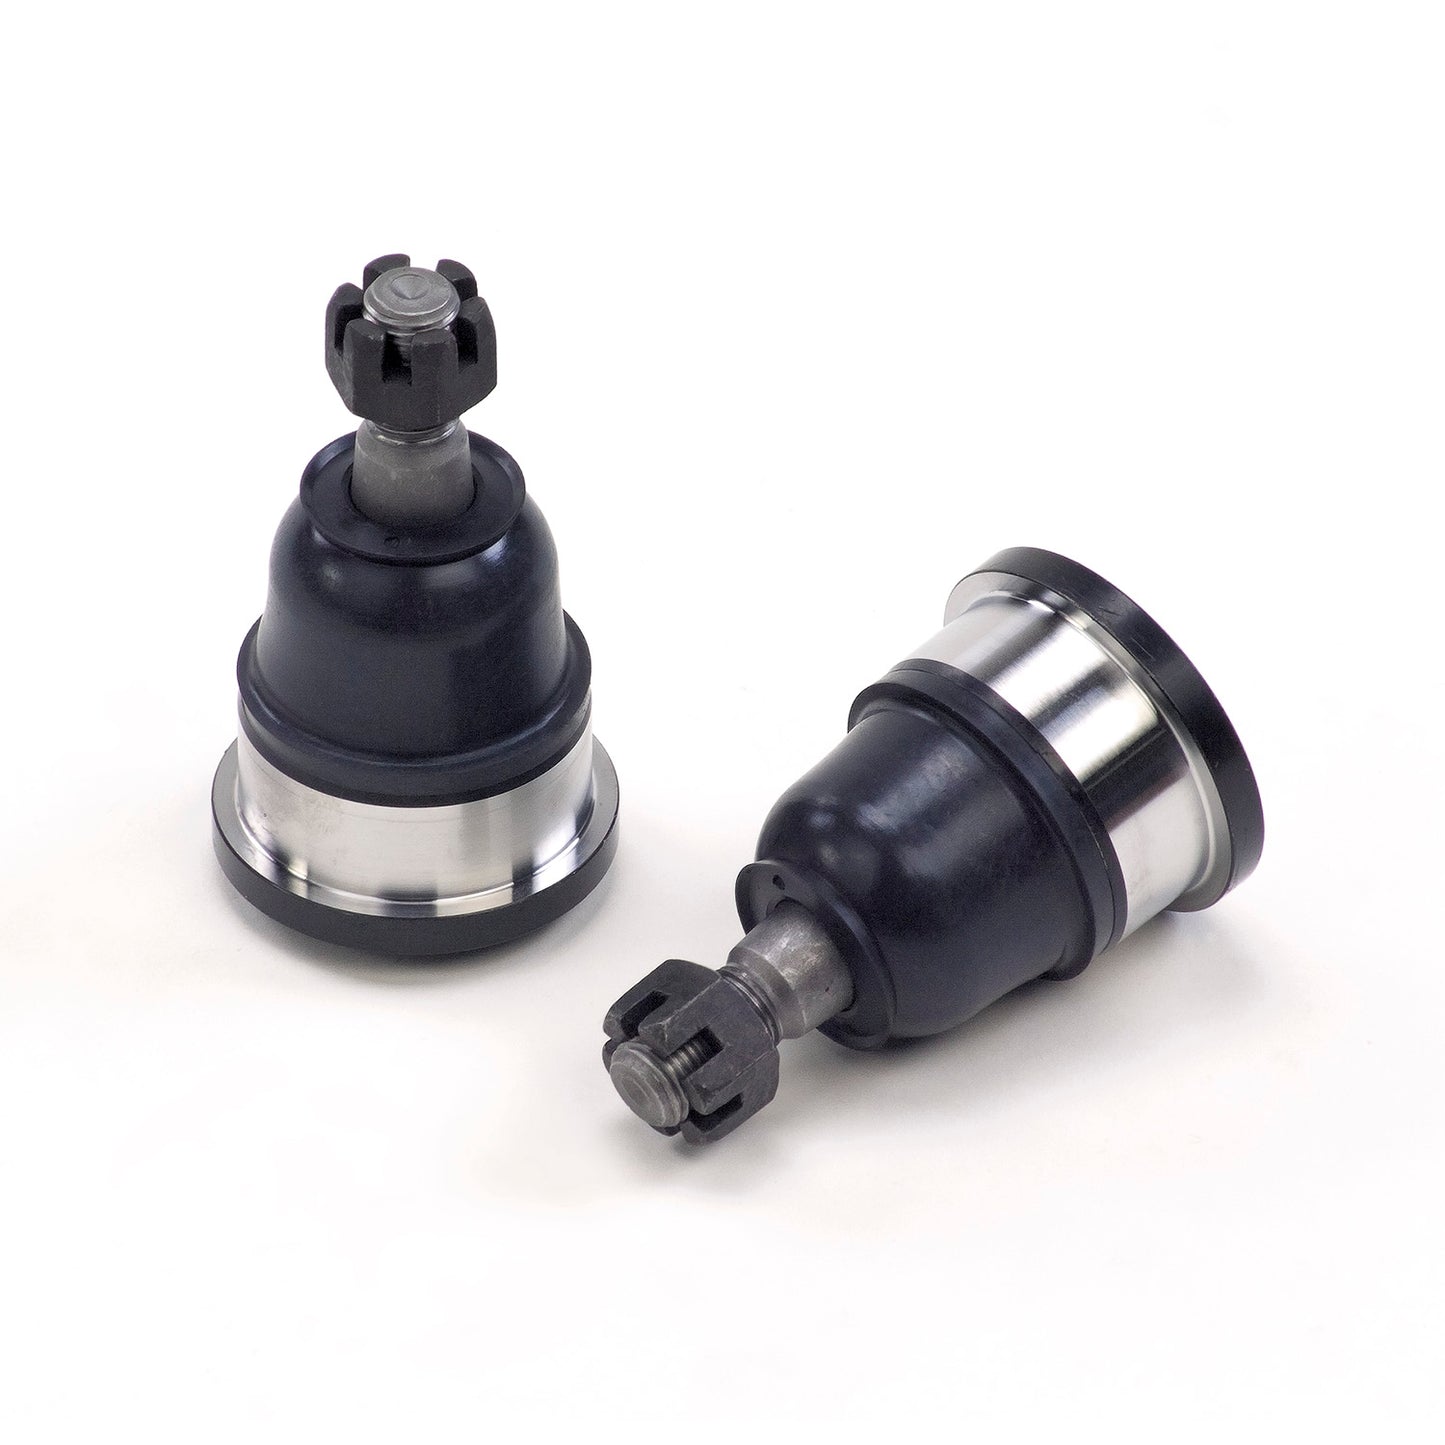 Hotchkis Sport Suspension Lower Ball Joint For 64-72 A-Body cars must use the lower ball joint for the spindle you use. 1155